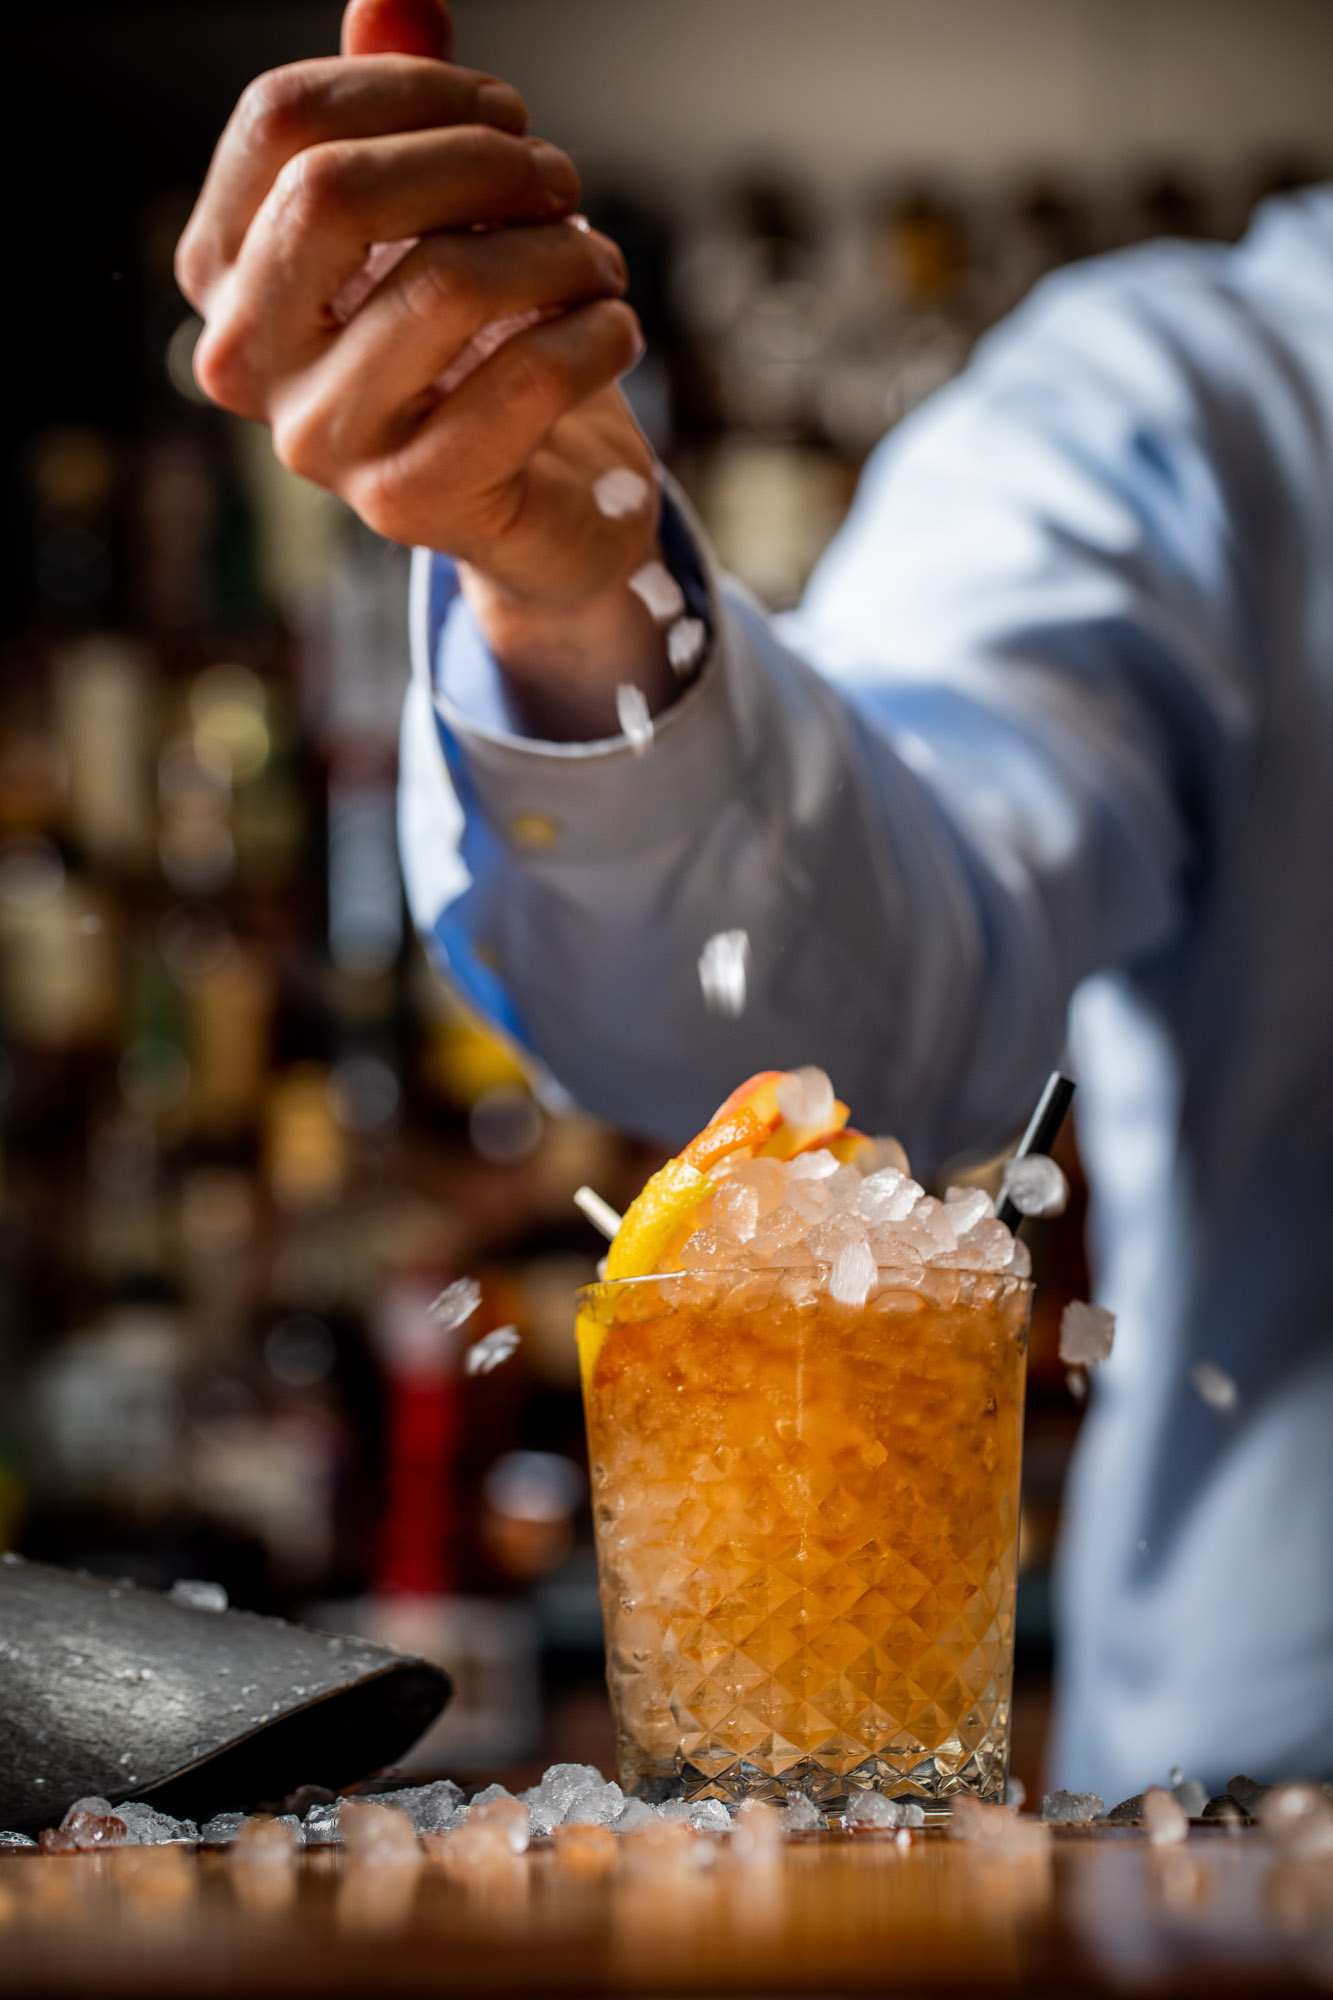 A hand dropping ice on a cocktail